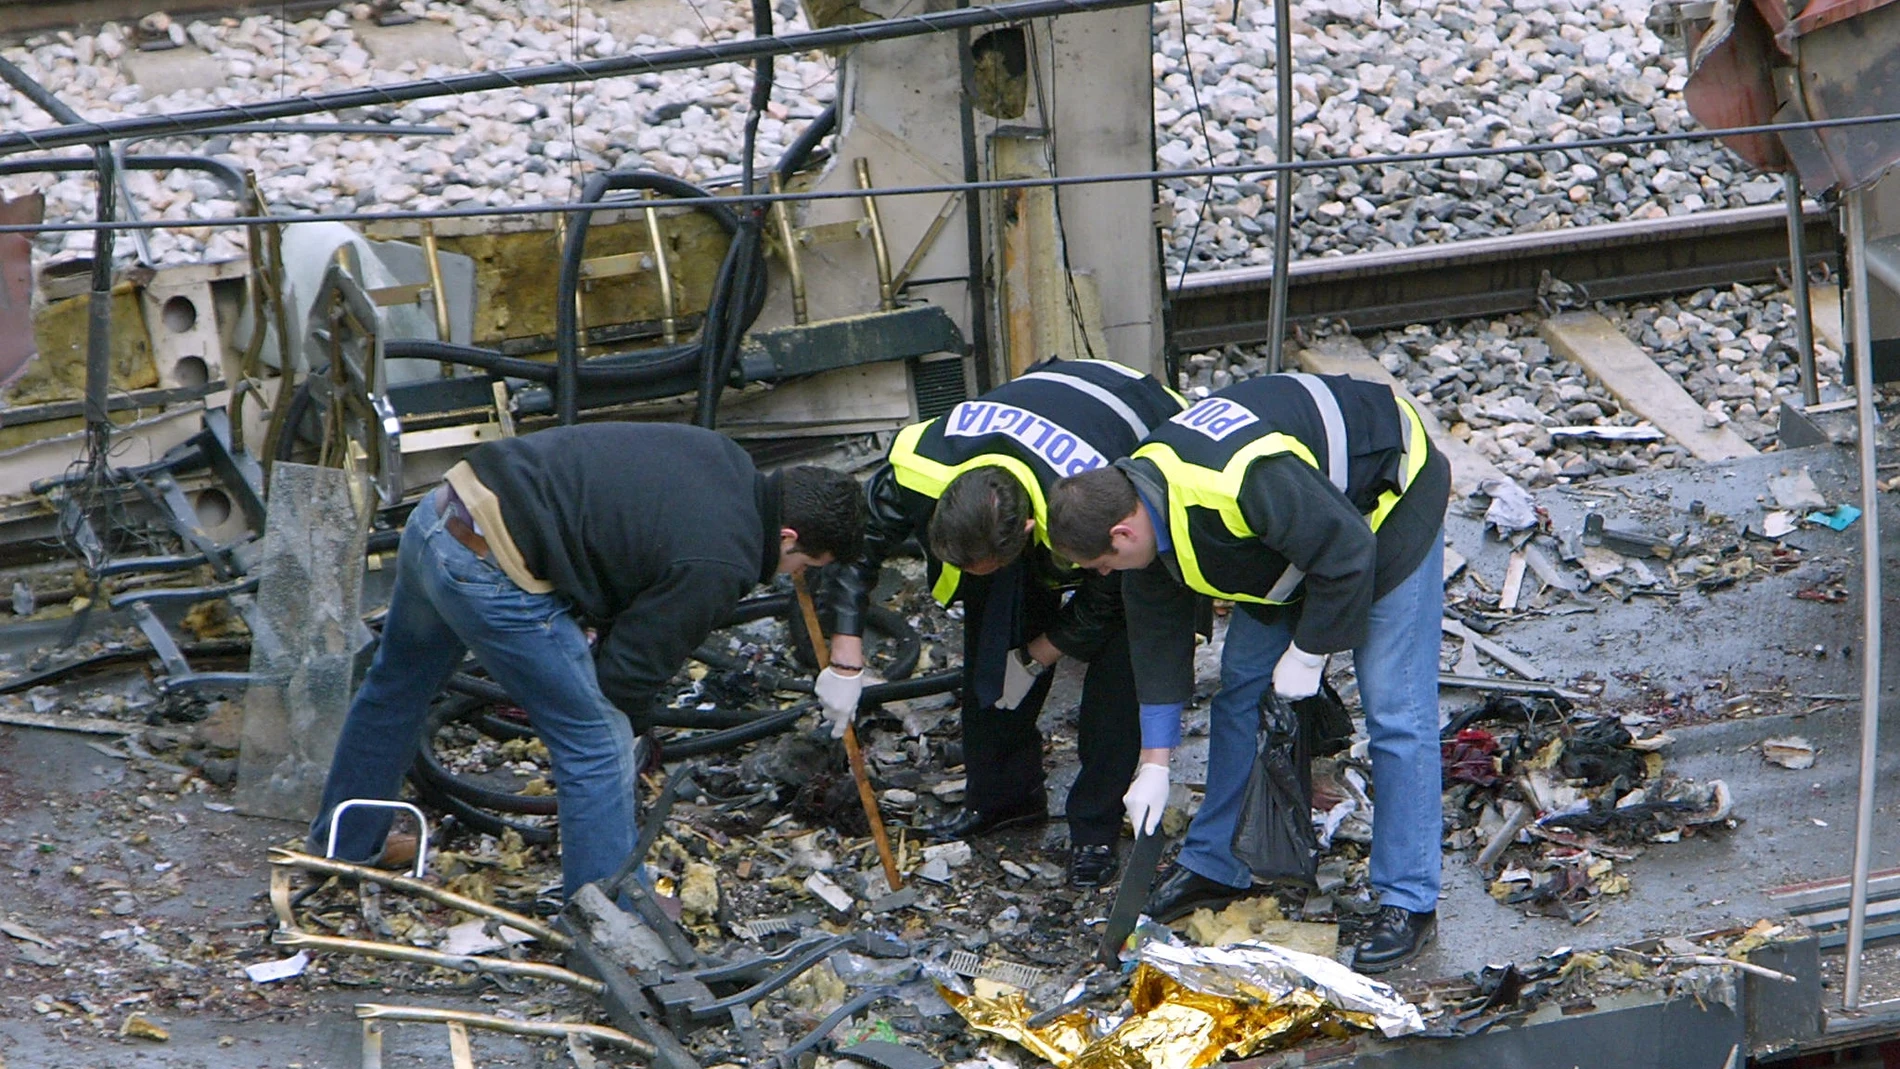 Forensic experts inspect the trains which exploded at the Atocha train station the day before, 12 March 2004 in Madrid. At least 198 people were killed and more than 1400 wounded in bomb attacks on four commuter trains, 11 March 2004.